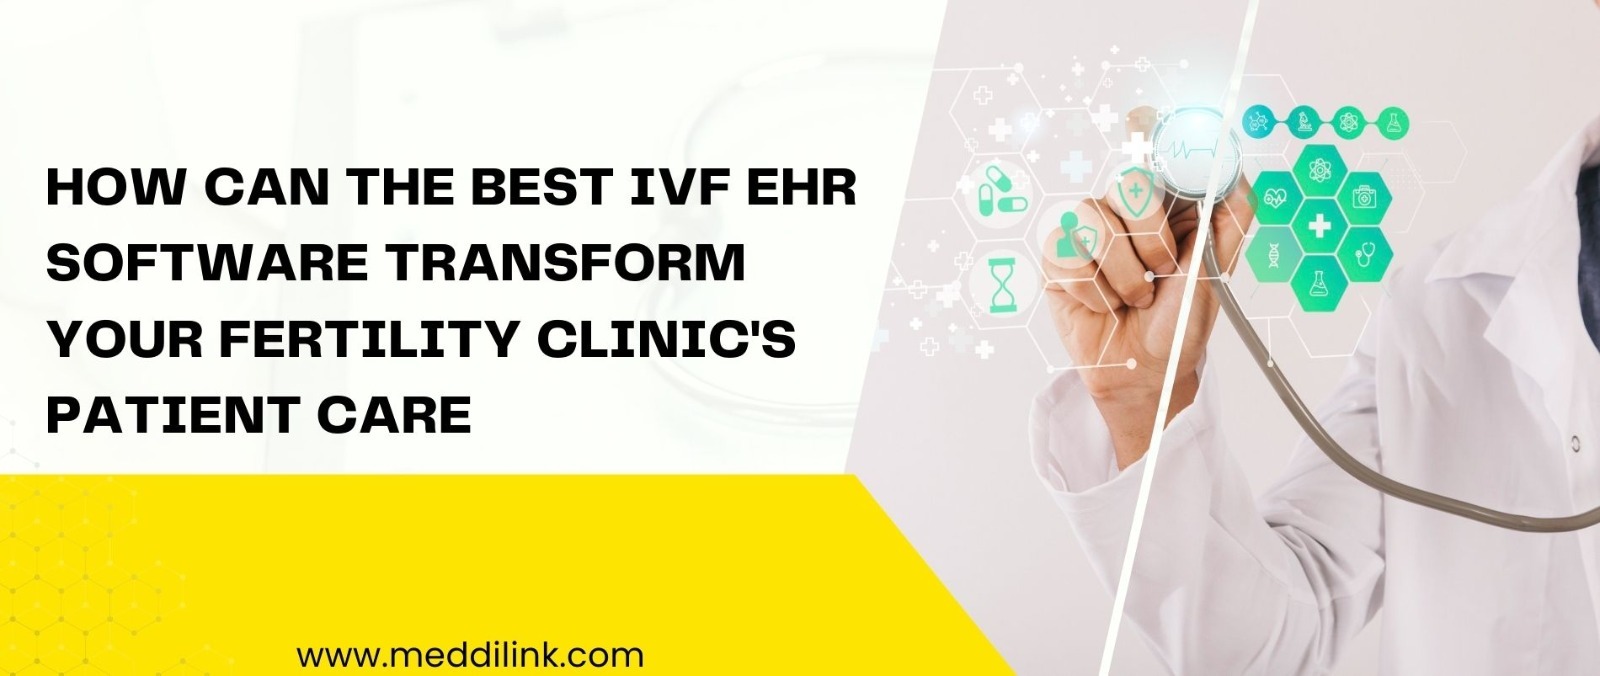 best IVF EHR Software for Fertility Clinic